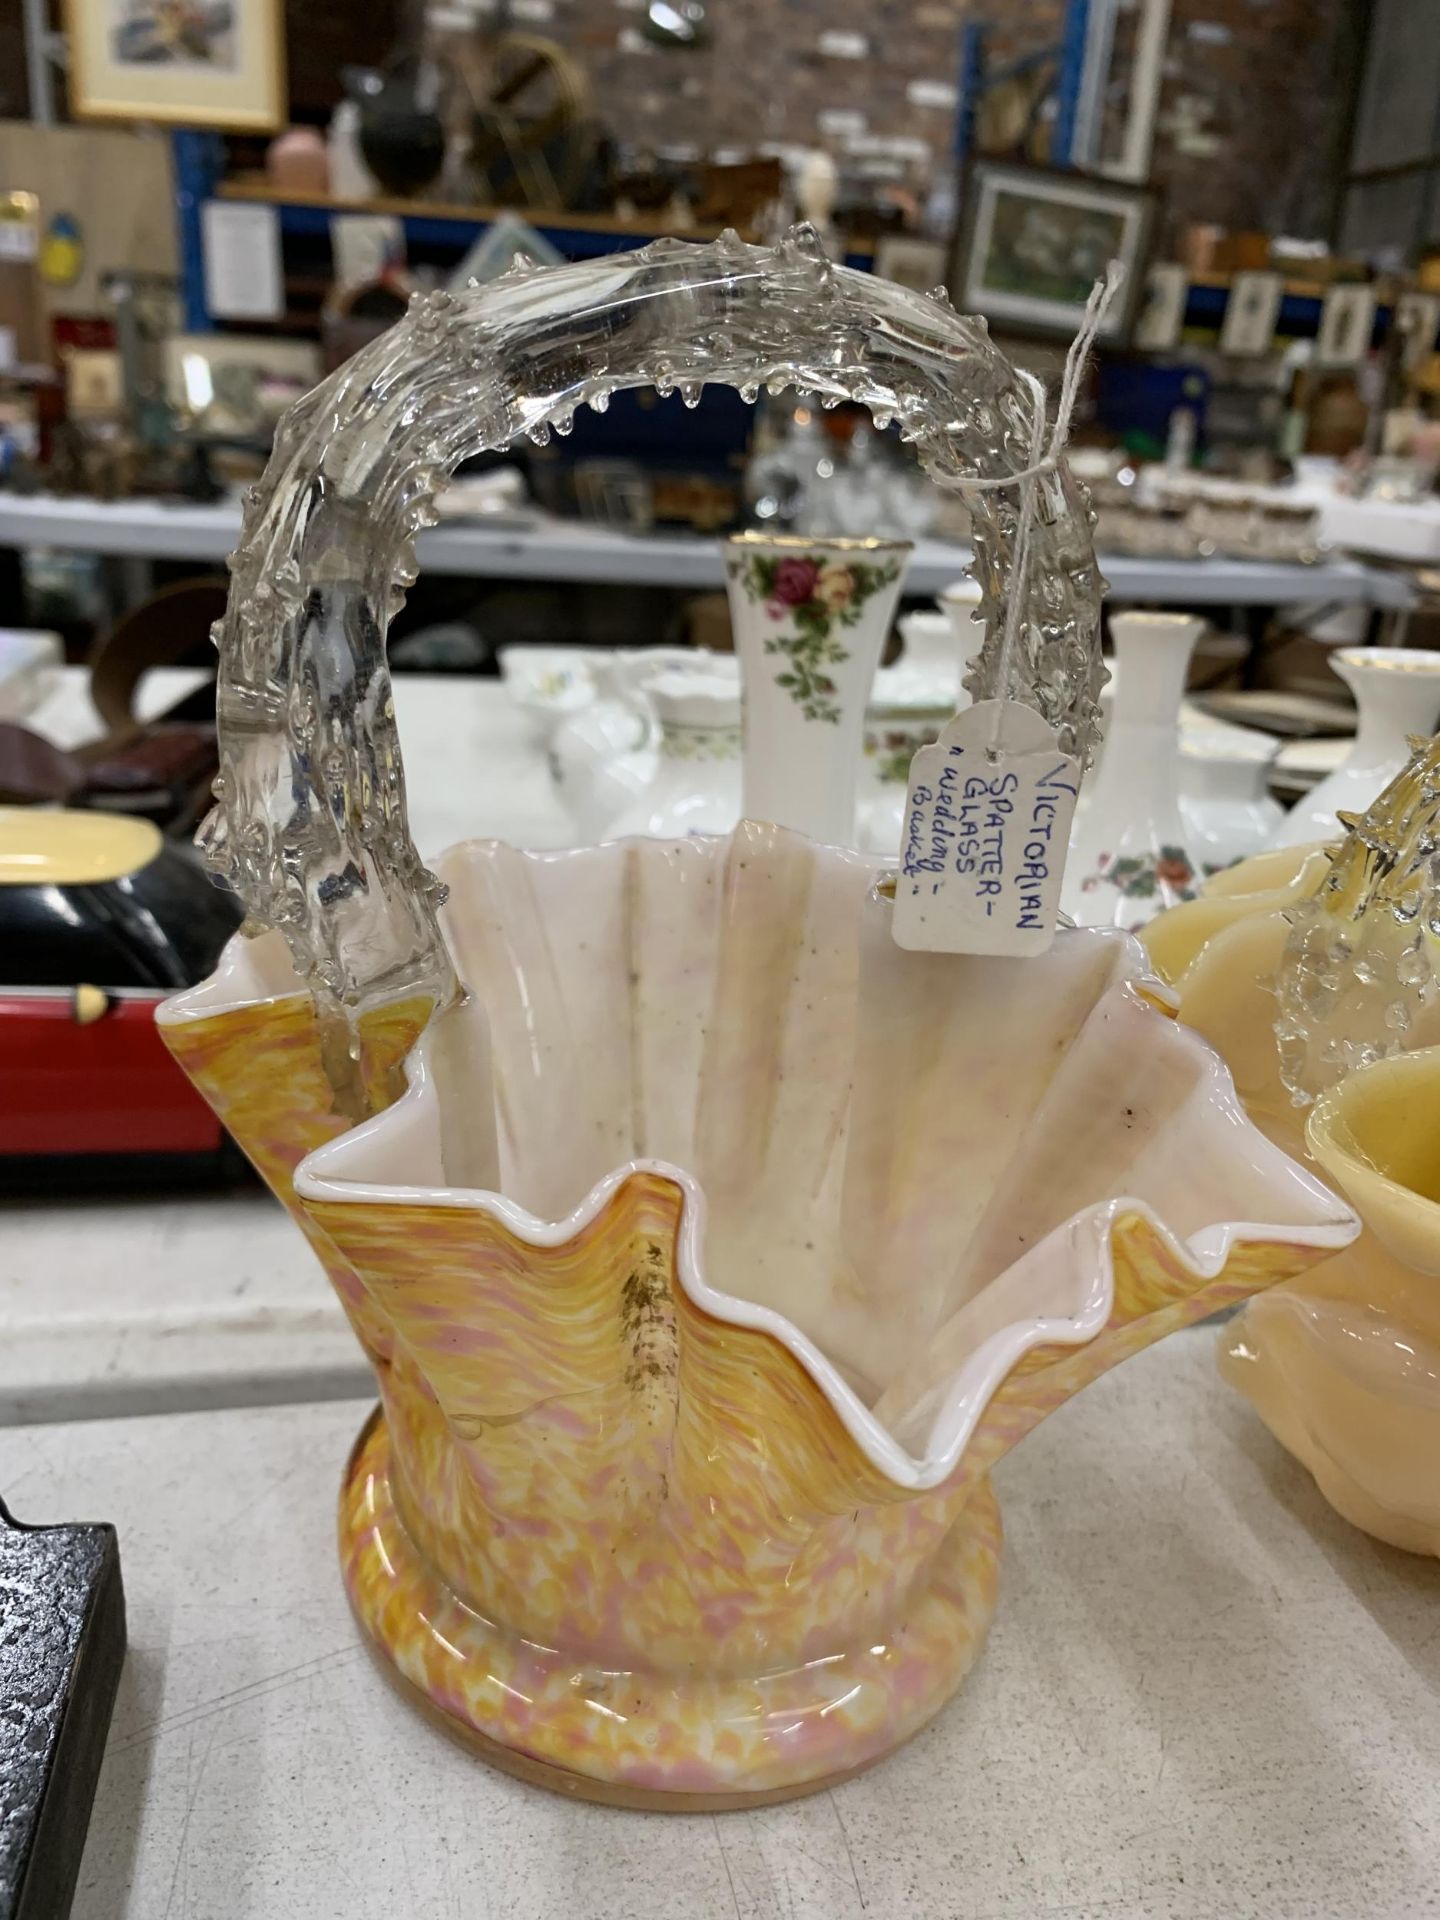 TWO VICTORIAN GLASS BASKETS - Image 2 of 3